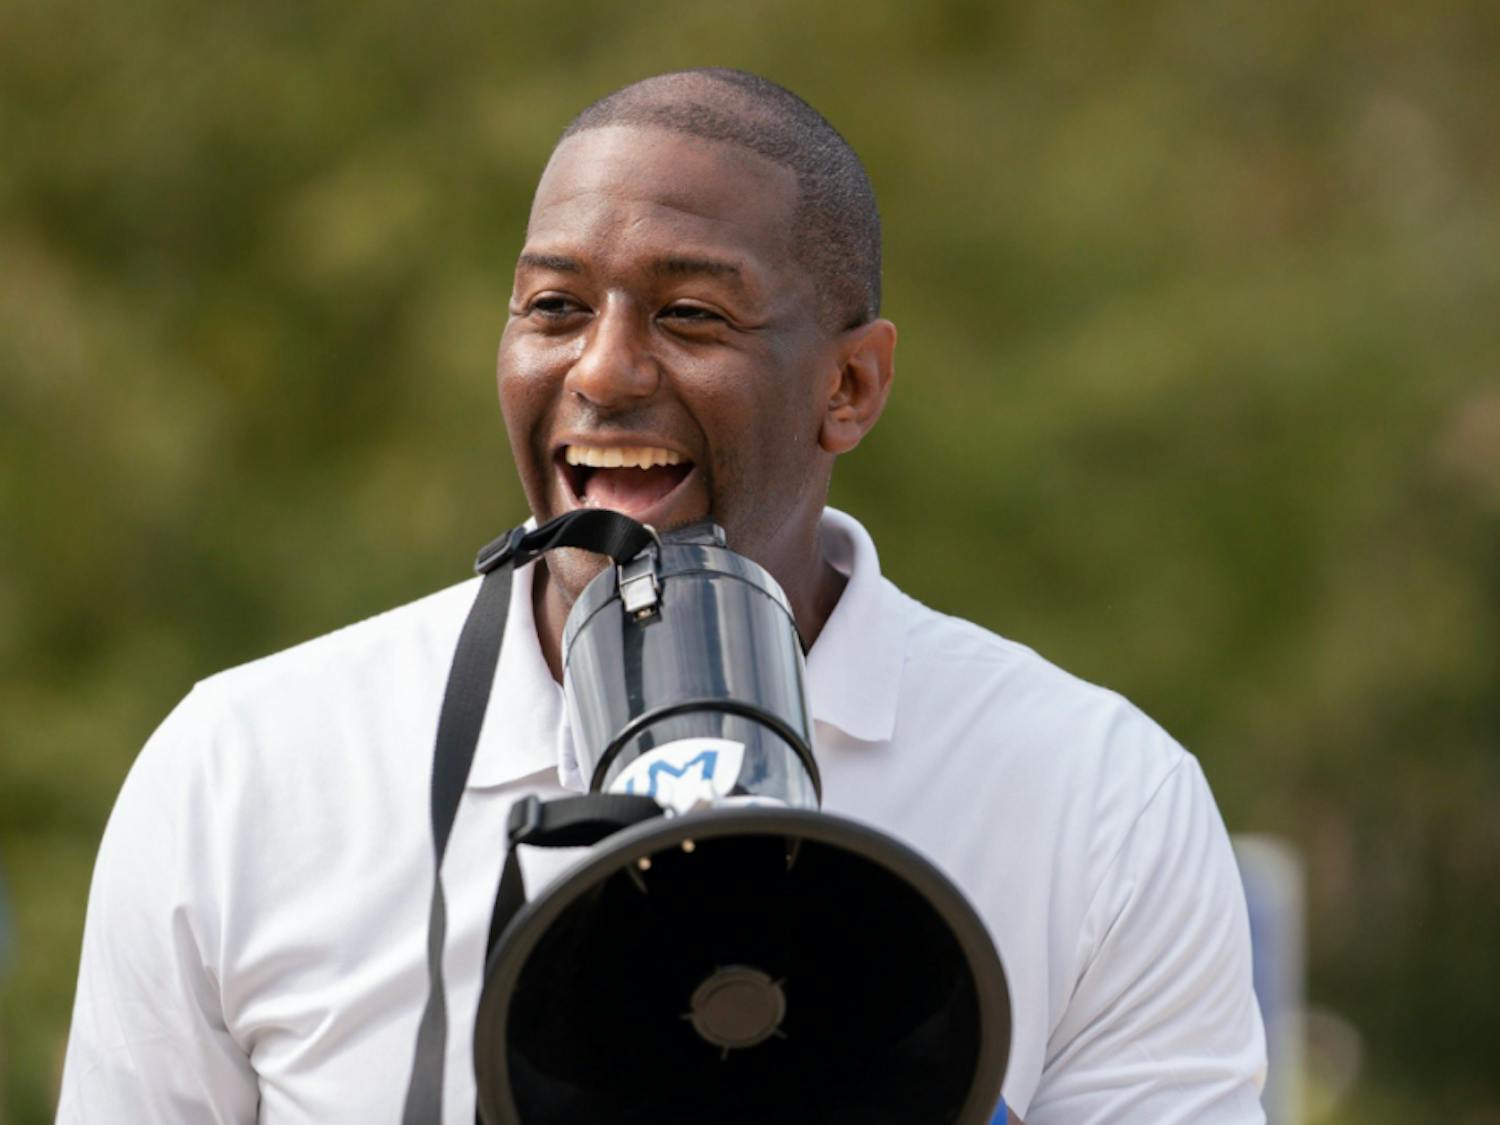 Mayor of Tallahassee and gubernatorial candidate Andrew Gillum laughs while speaking at a rally on UF's campus Friday afternoon. During the event, hosted by the Andrew Gillum campaign, Gillum walked with students to the polls.